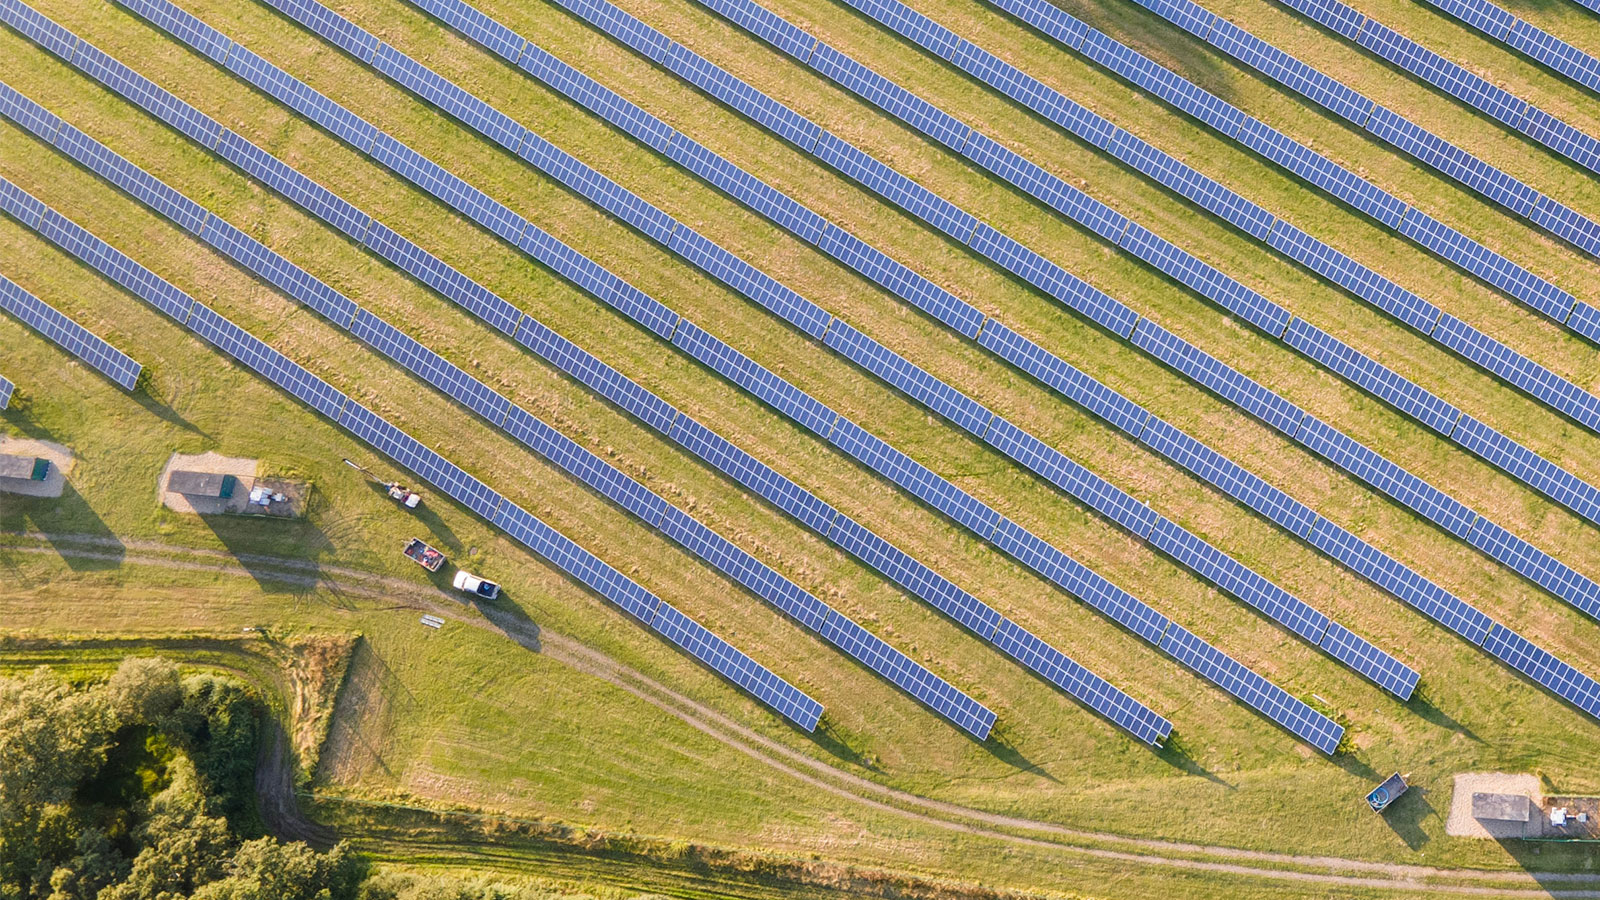 What role could GB Energy play to develop renewables in the UK?